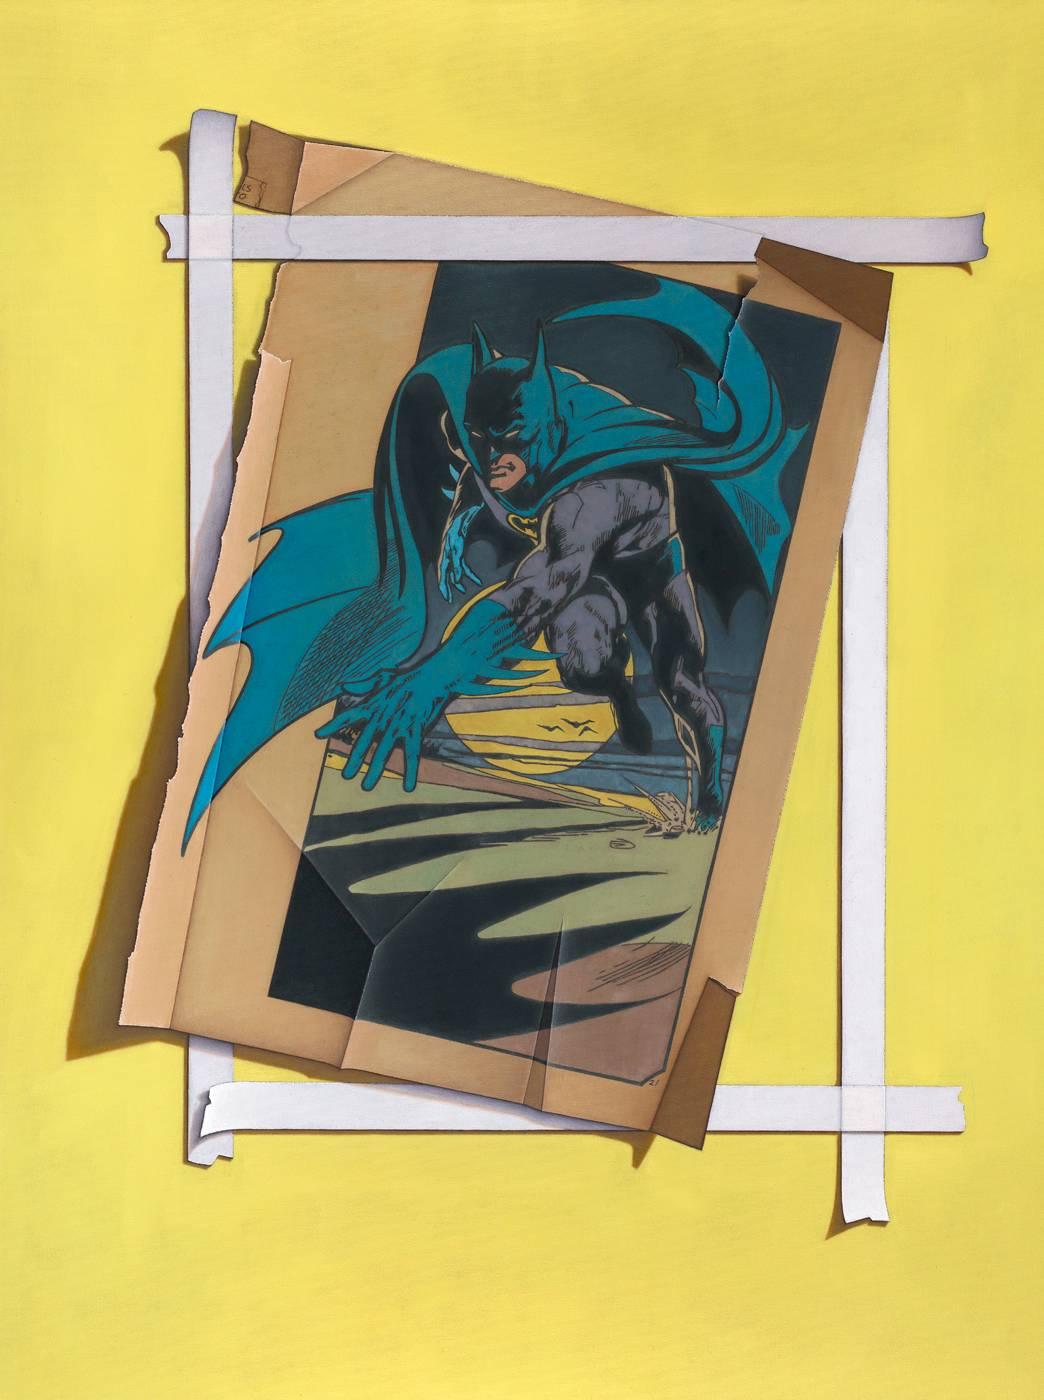 A trompe l'oeil painting of the superhero Batman.

There is more information about Anthony Mastromatteo: Looking at Anthony Mastromatteo’s childhood in retrospect, it’s unlikely that anyone would have imagined that he would grow up to become an